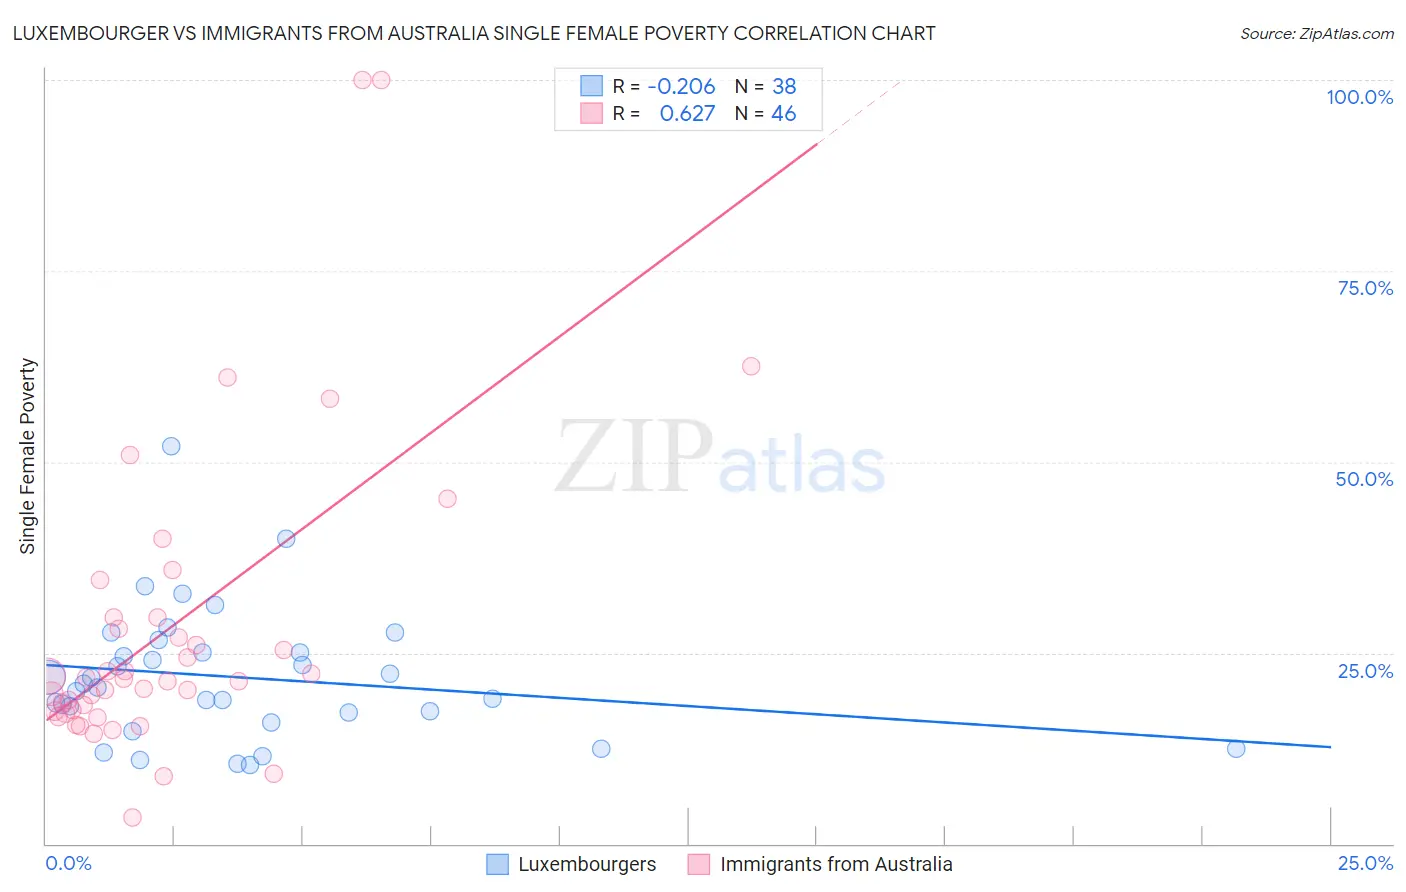 Luxembourger vs Immigrants from Australia Single Female Poverty